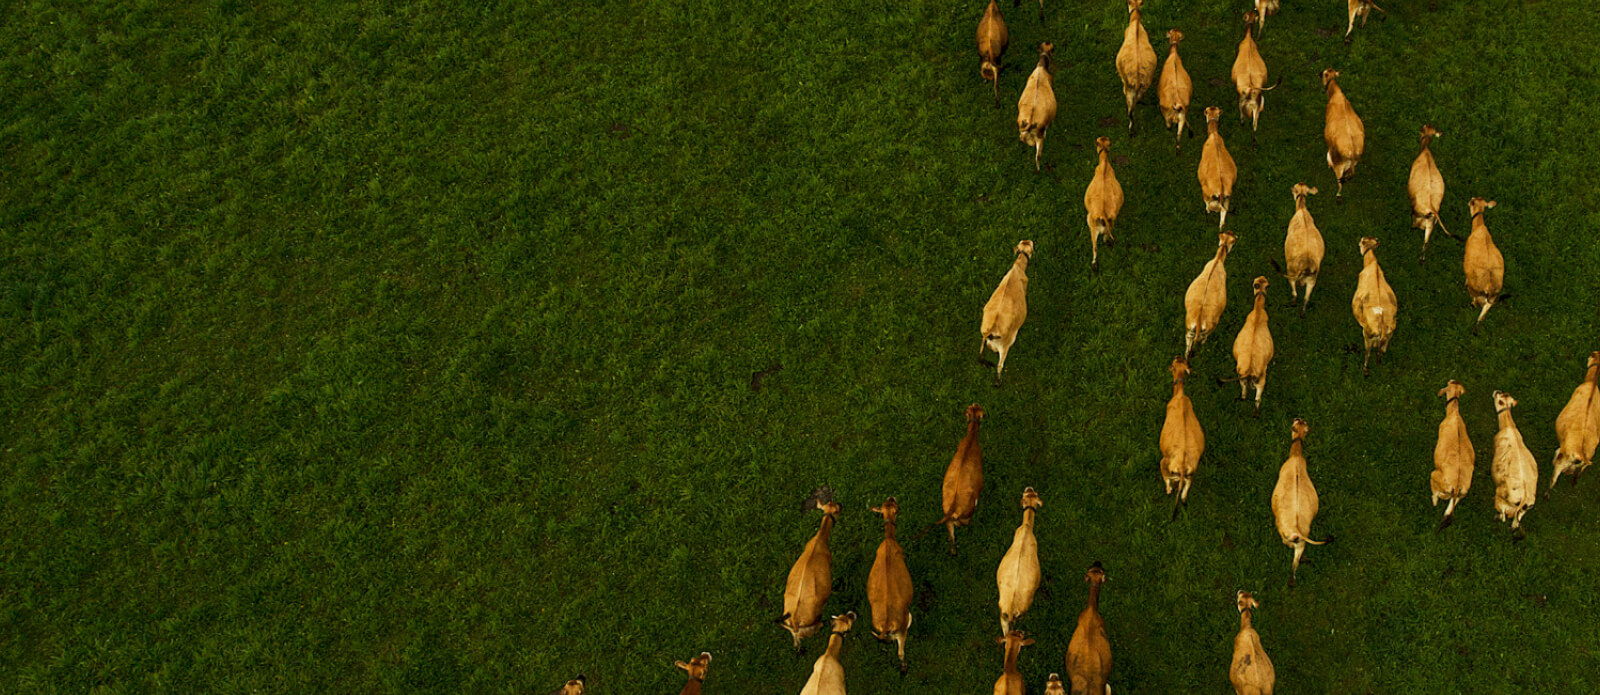 Arial shot of cows in a pasture